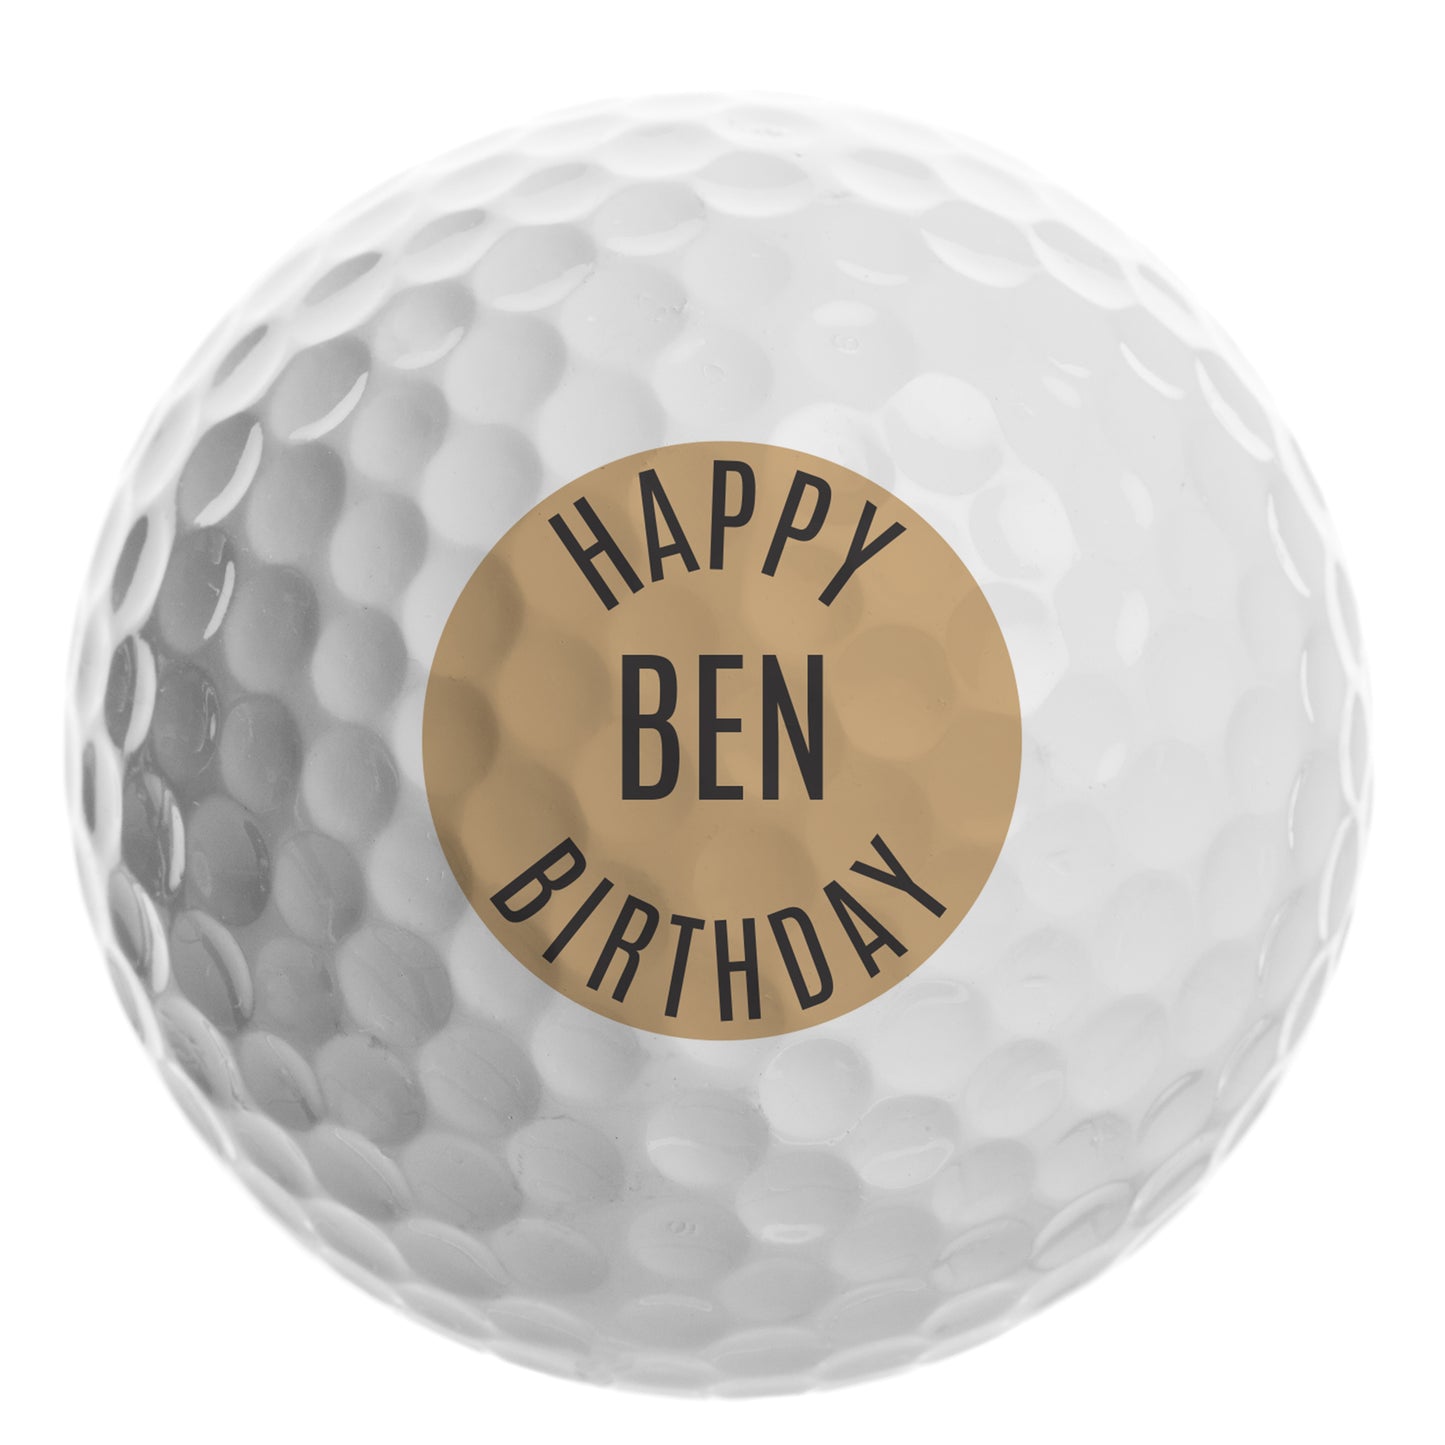 Personalised Happy Birthday Golf Ball - Personalise It!